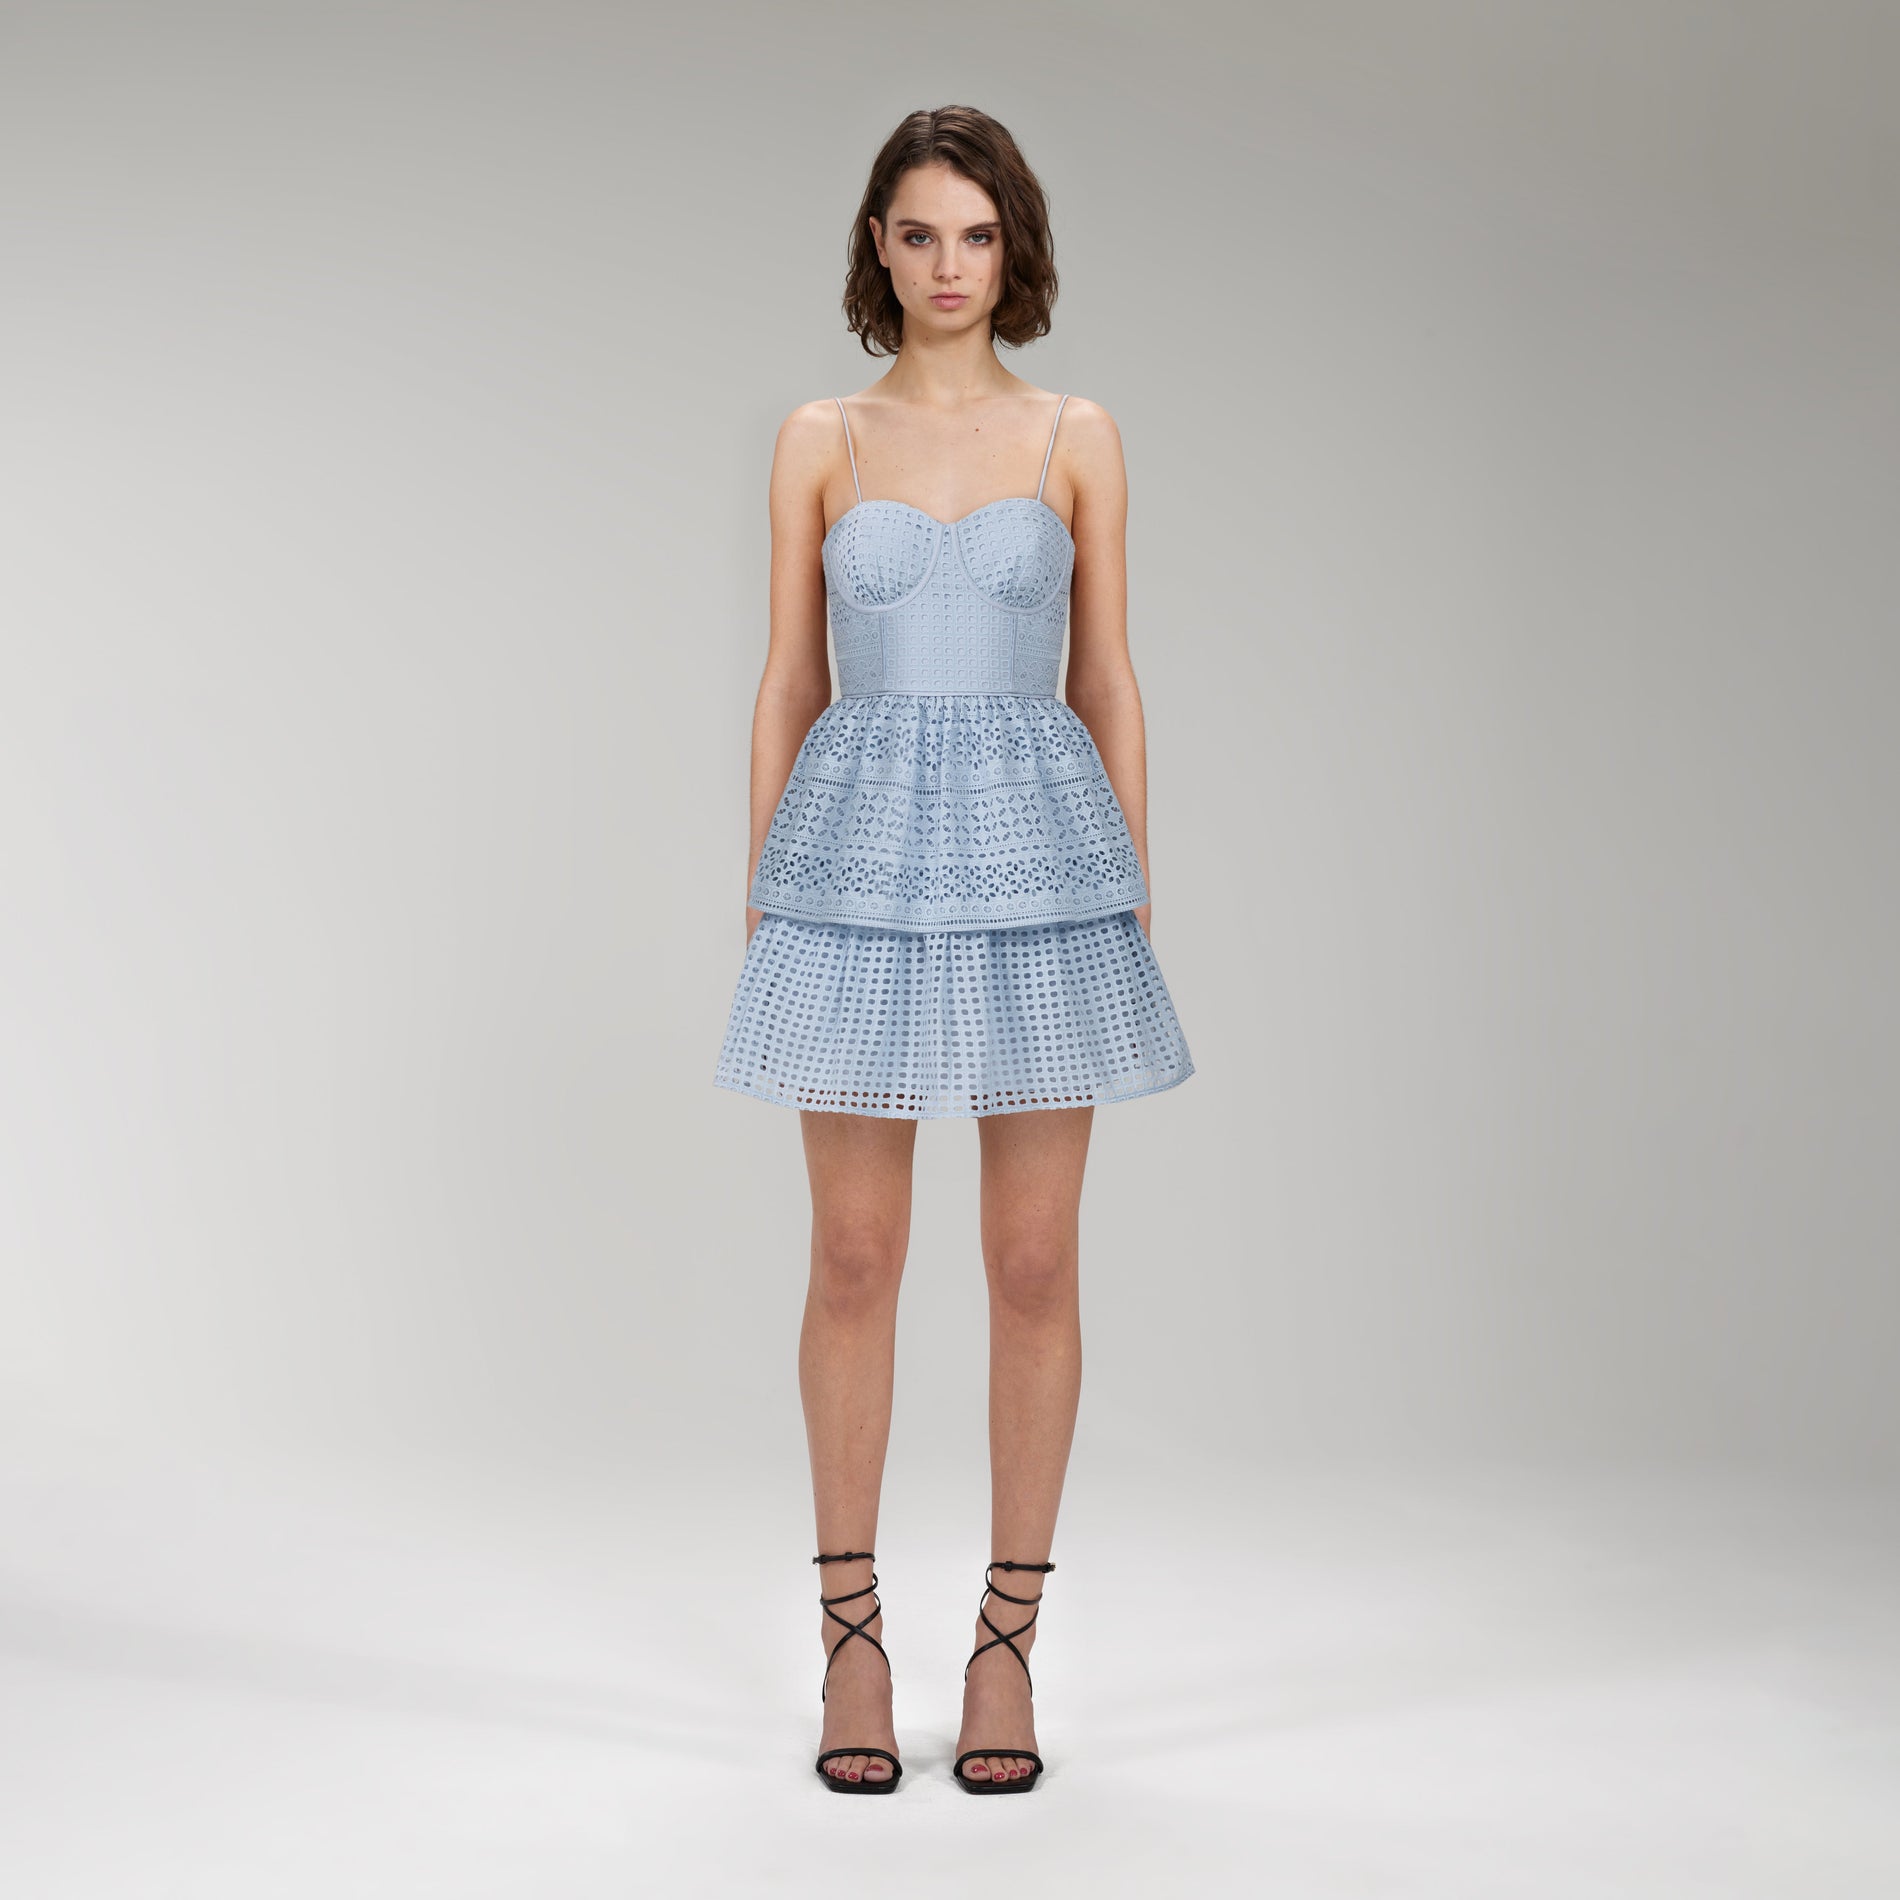 A woman wearing the Light Blue Cotton Broderie Anglaise Mini Dress